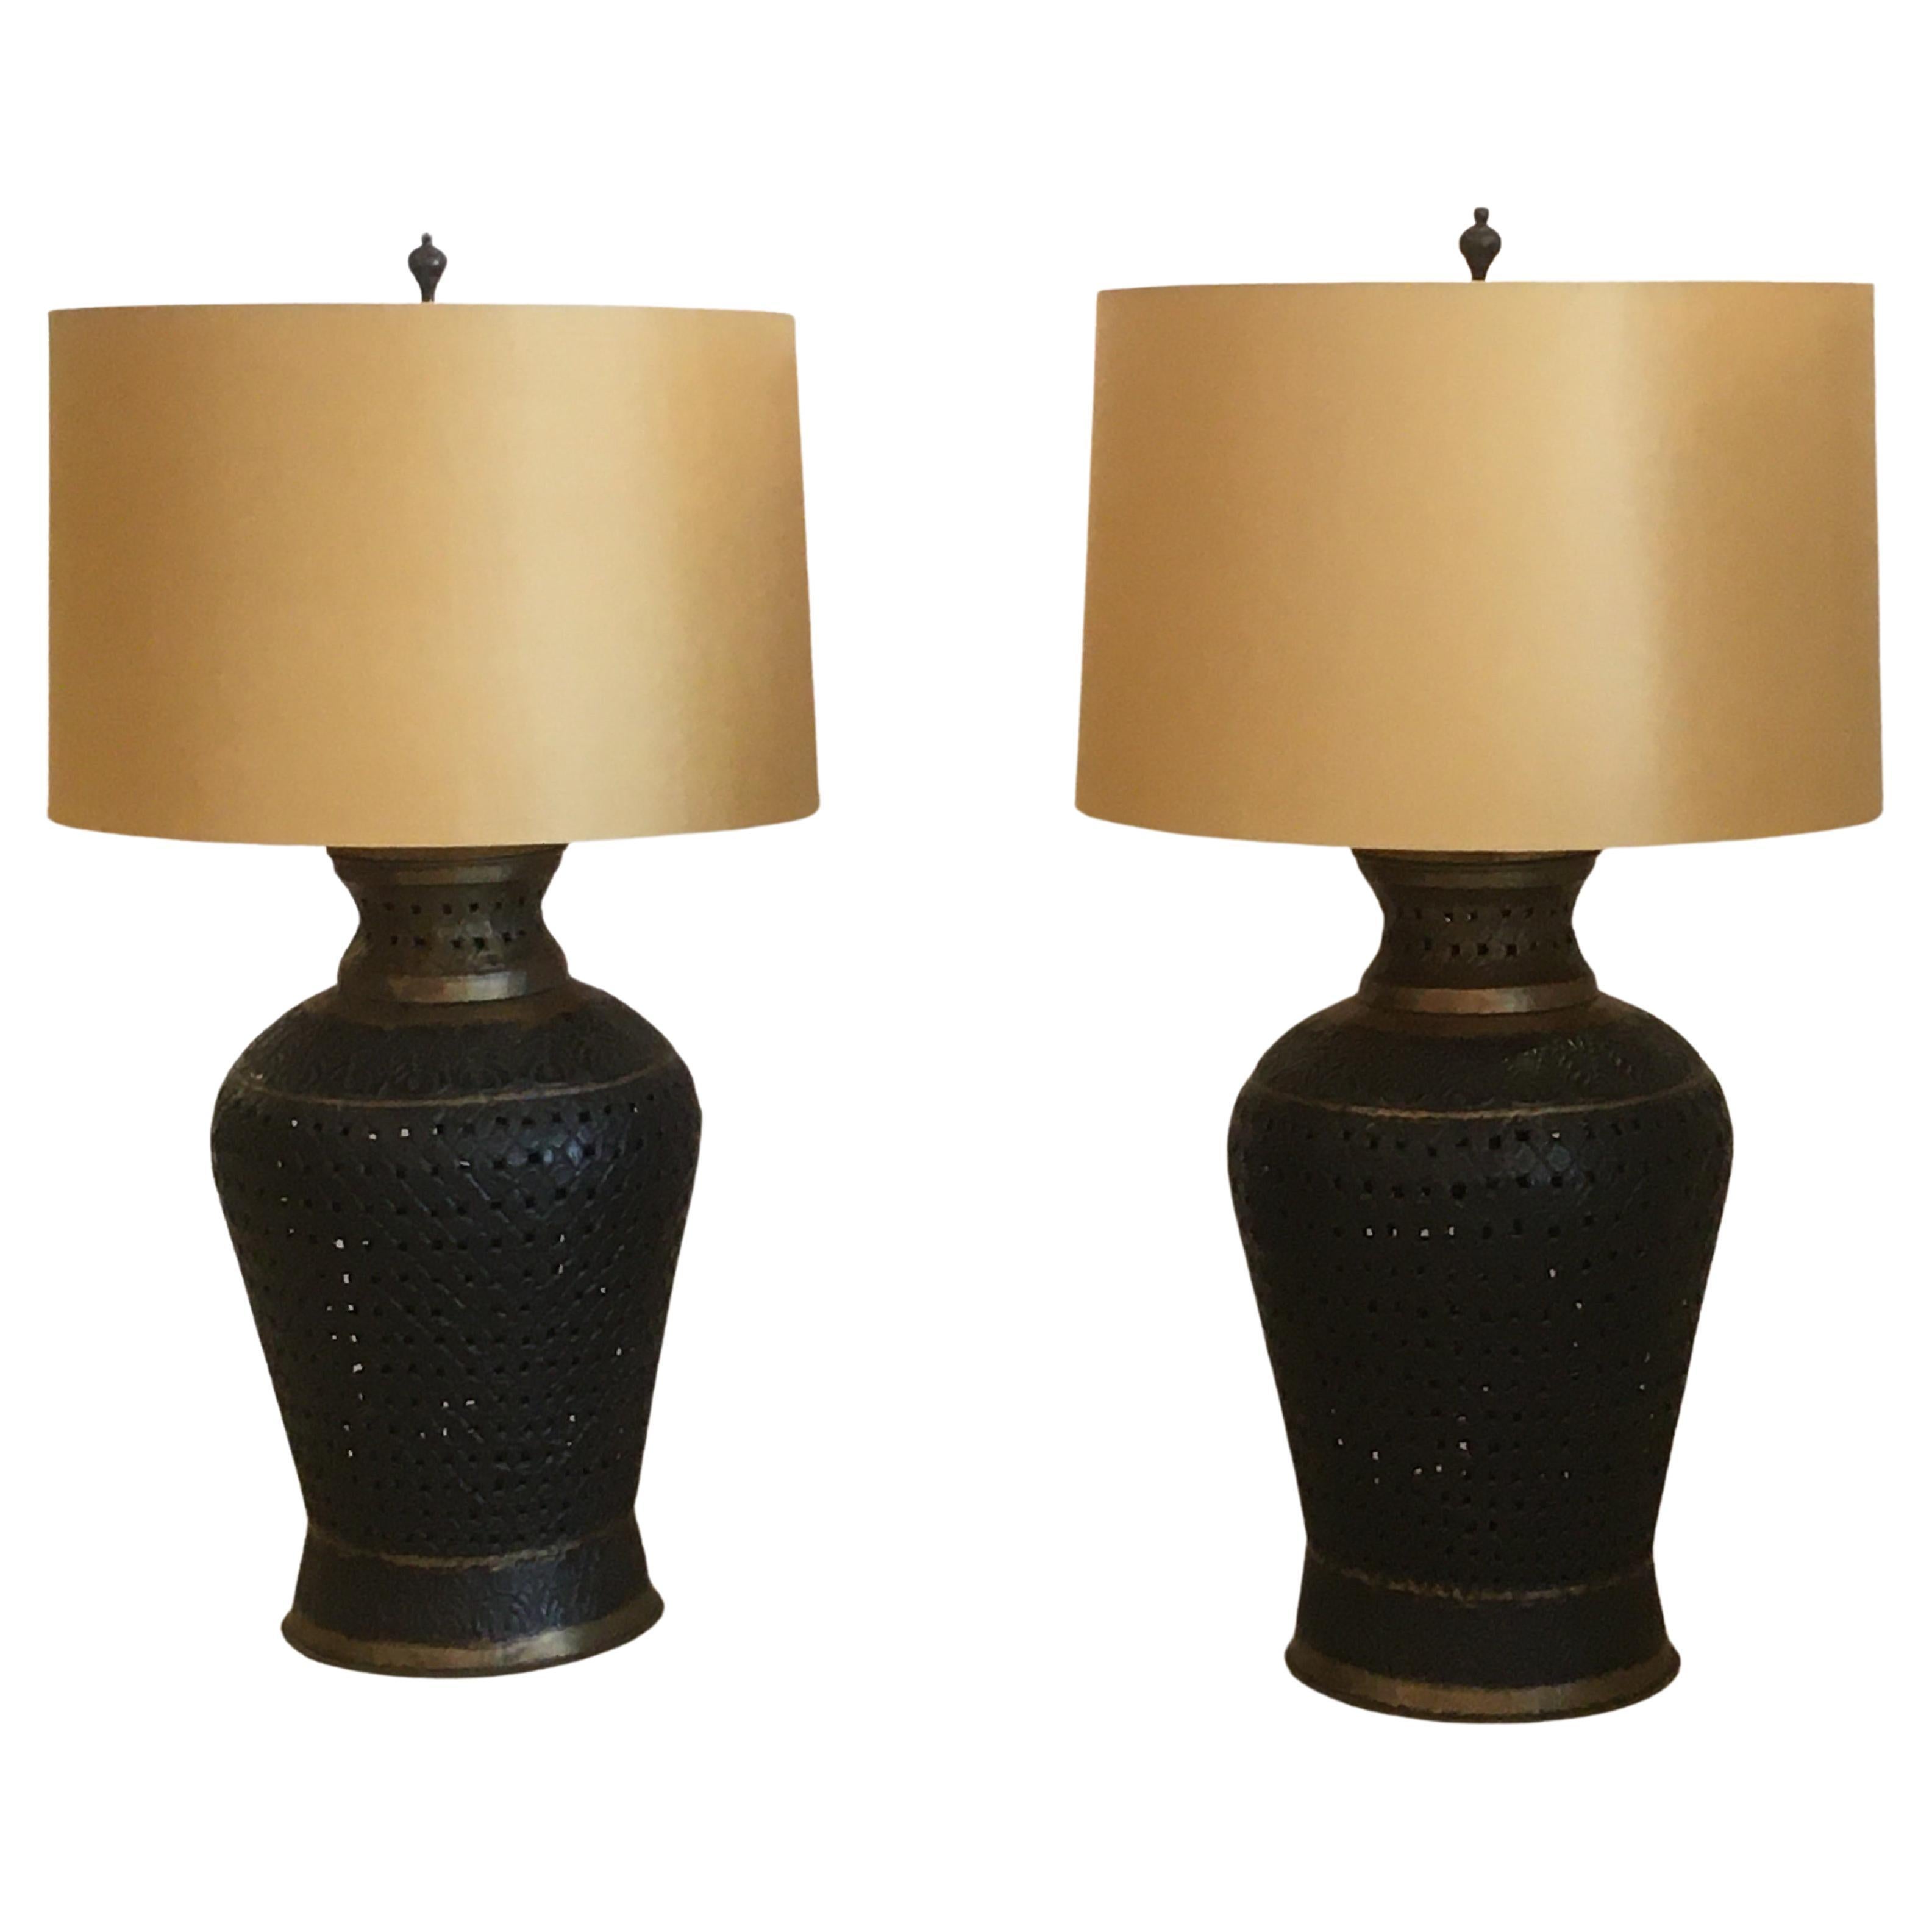 Big gutsy pair of pierced metal table lamps in a handsome shade of brown with gold accents. Have an imported exotic and masculine feel. 
Shade 30